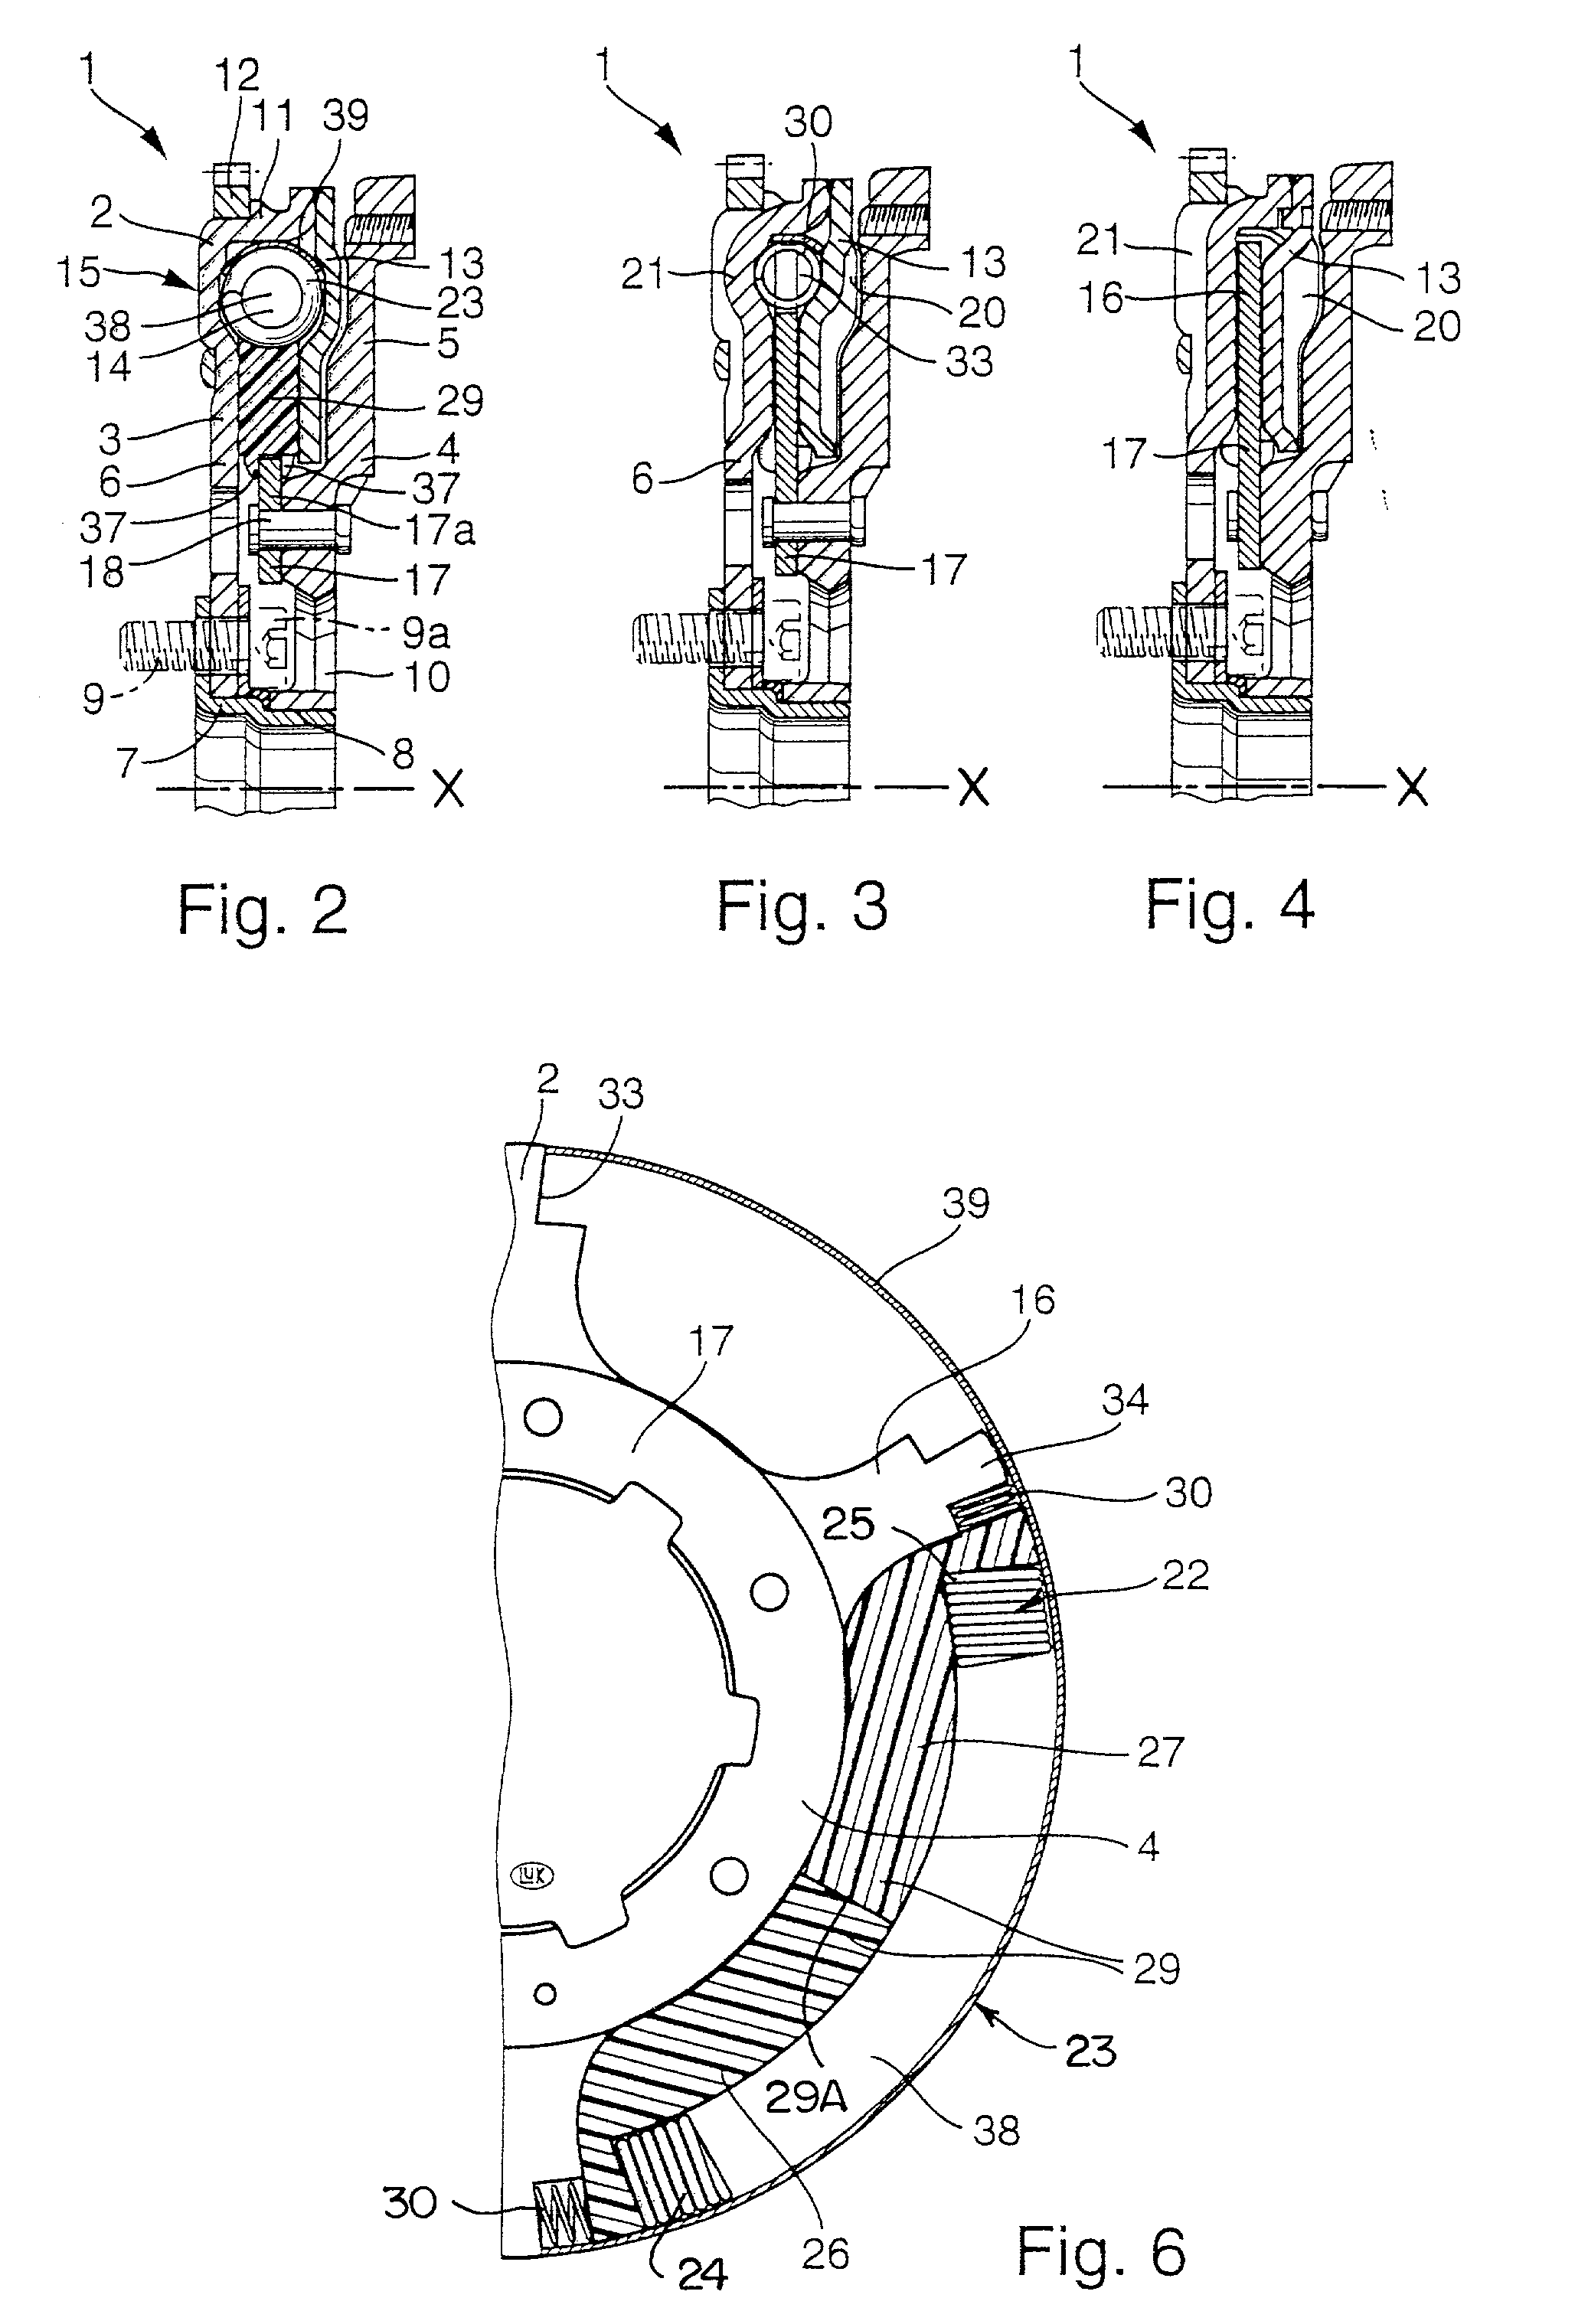 Apparatus for damping torsional vibrations in the power trains of motor vehicles and the like